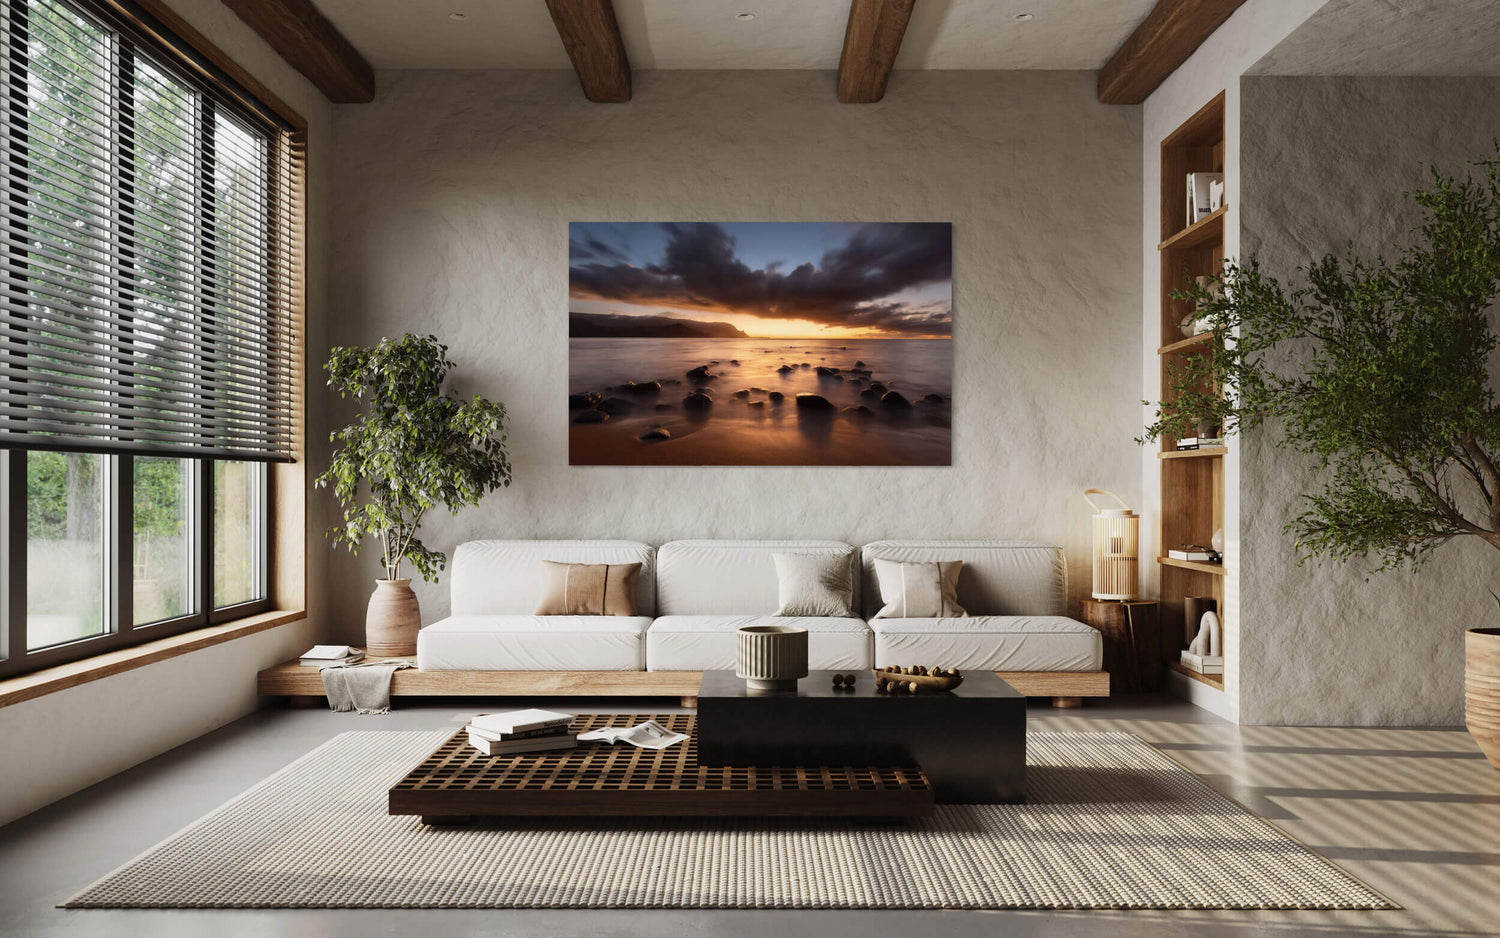 A piece of Kauai art showing a sunset picture of Hanalei Bay hangs in a living room.